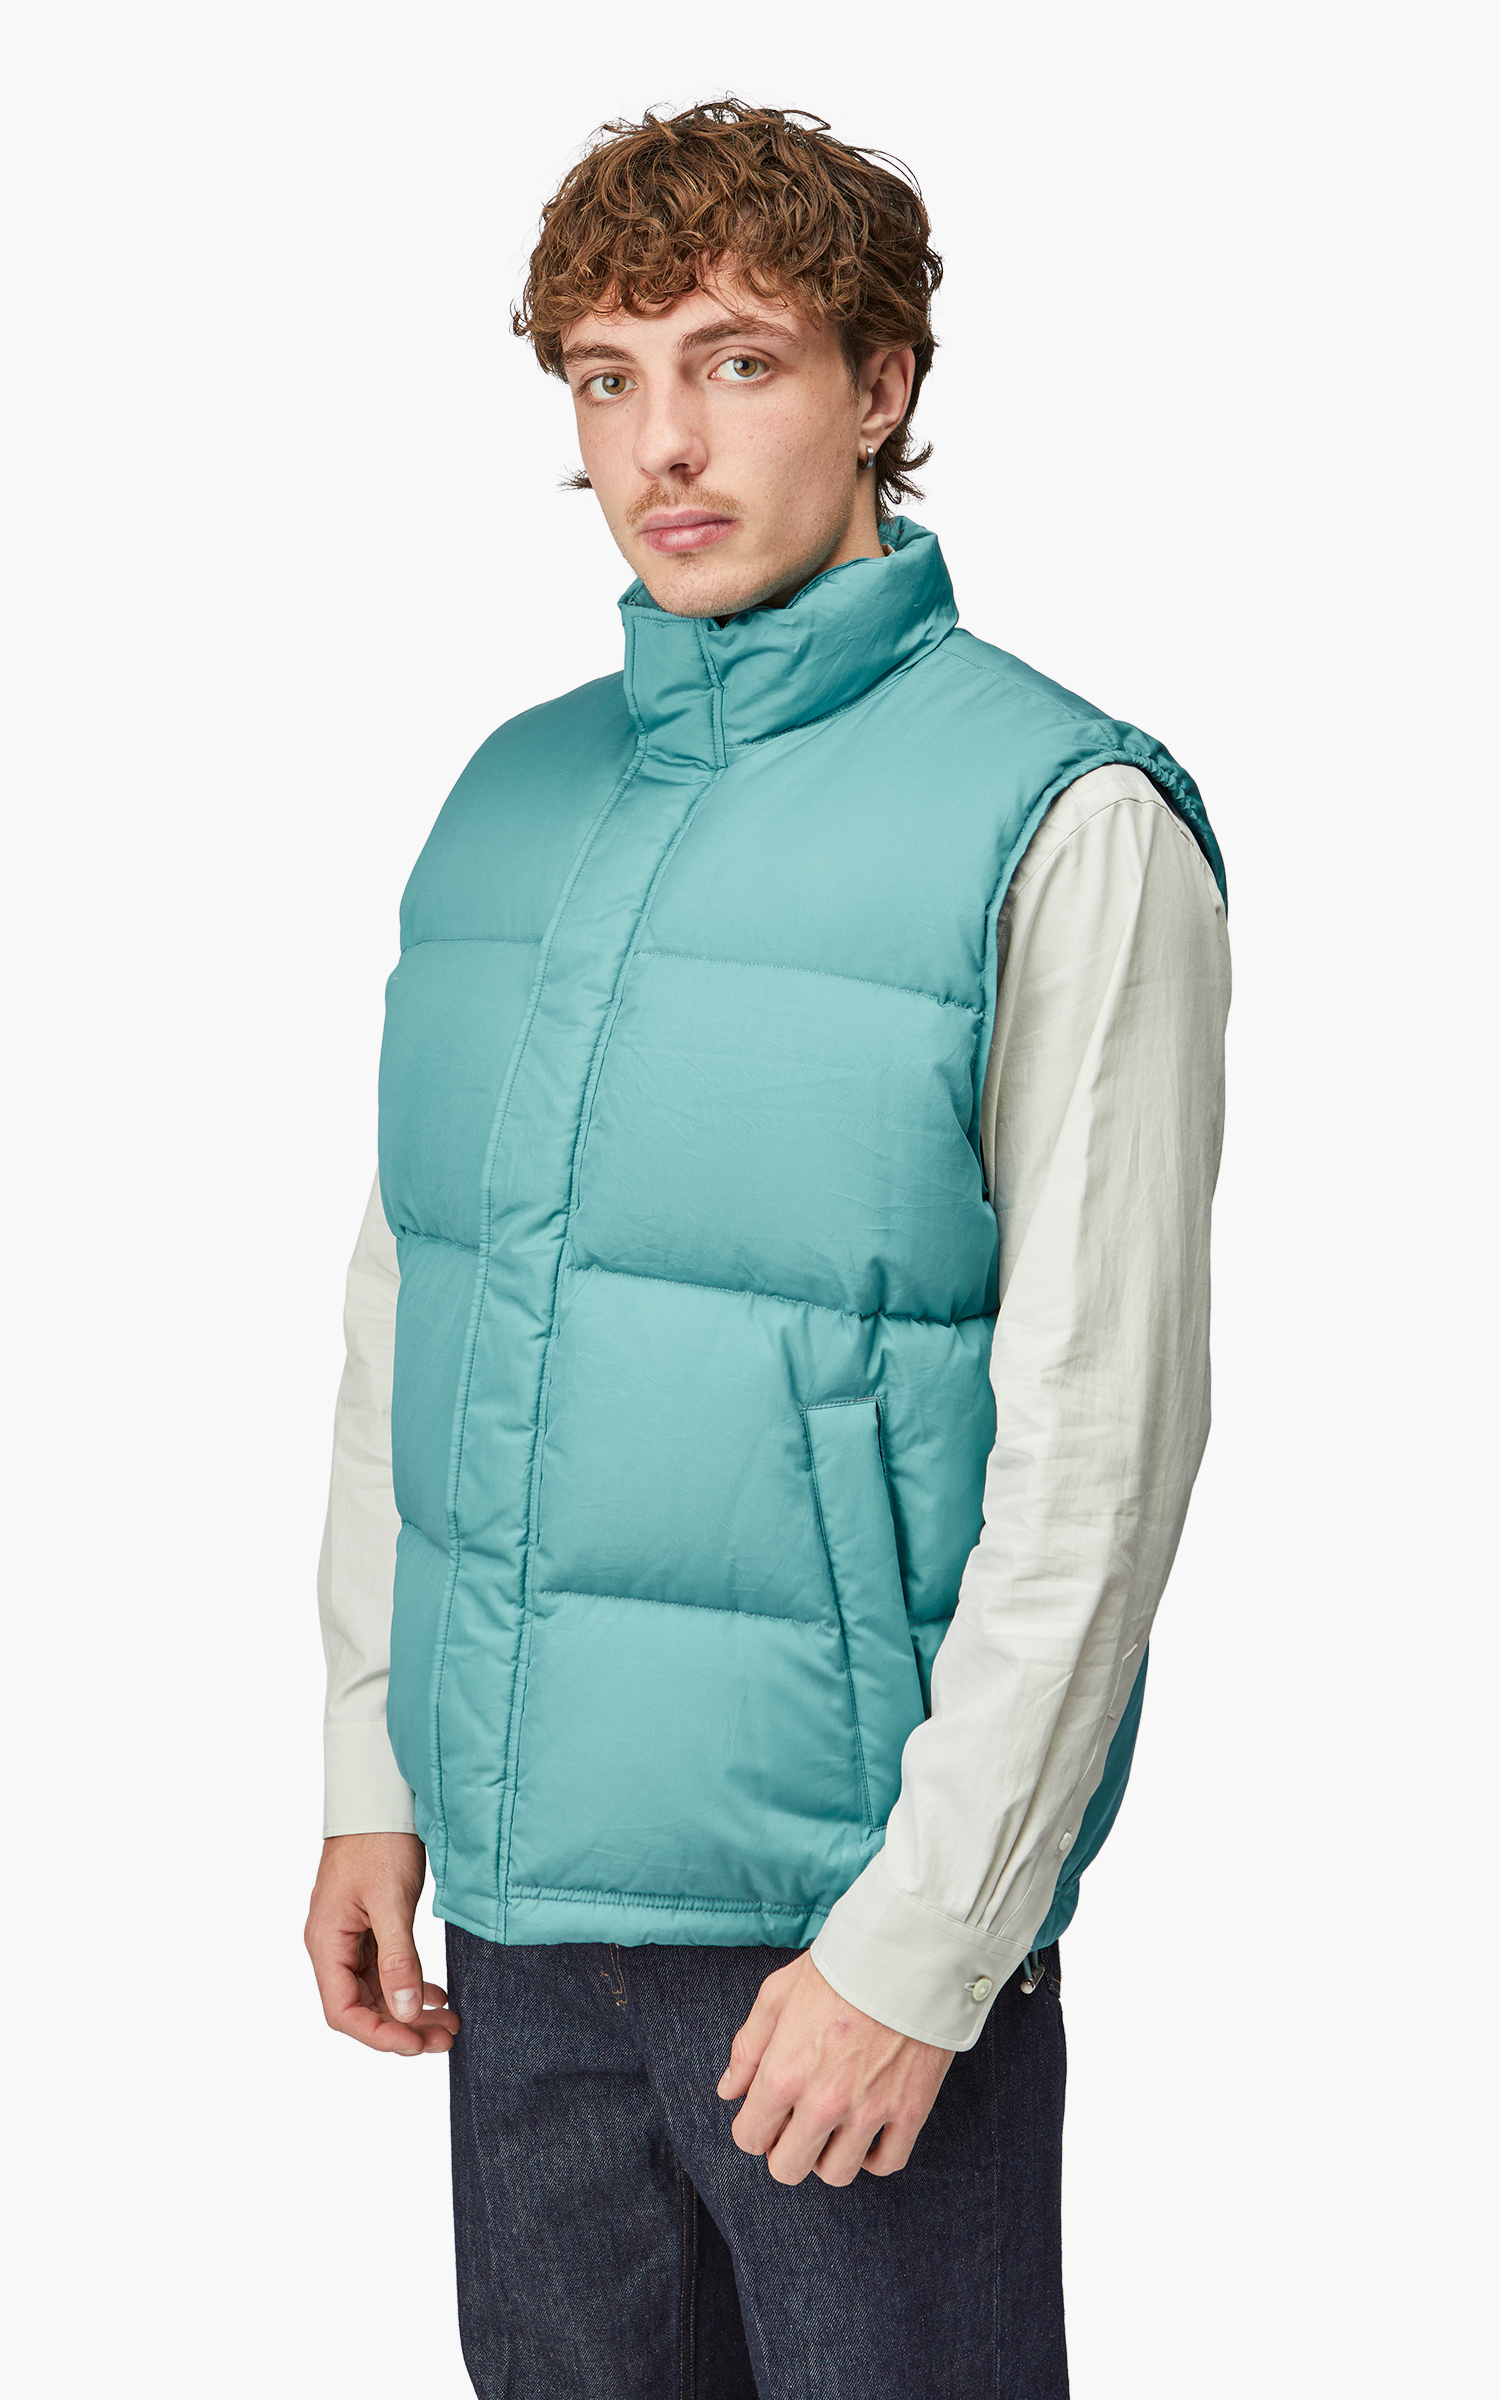 Auralee Suvin High Count Cloth Down Vest Cerulean Blue | Cultizm